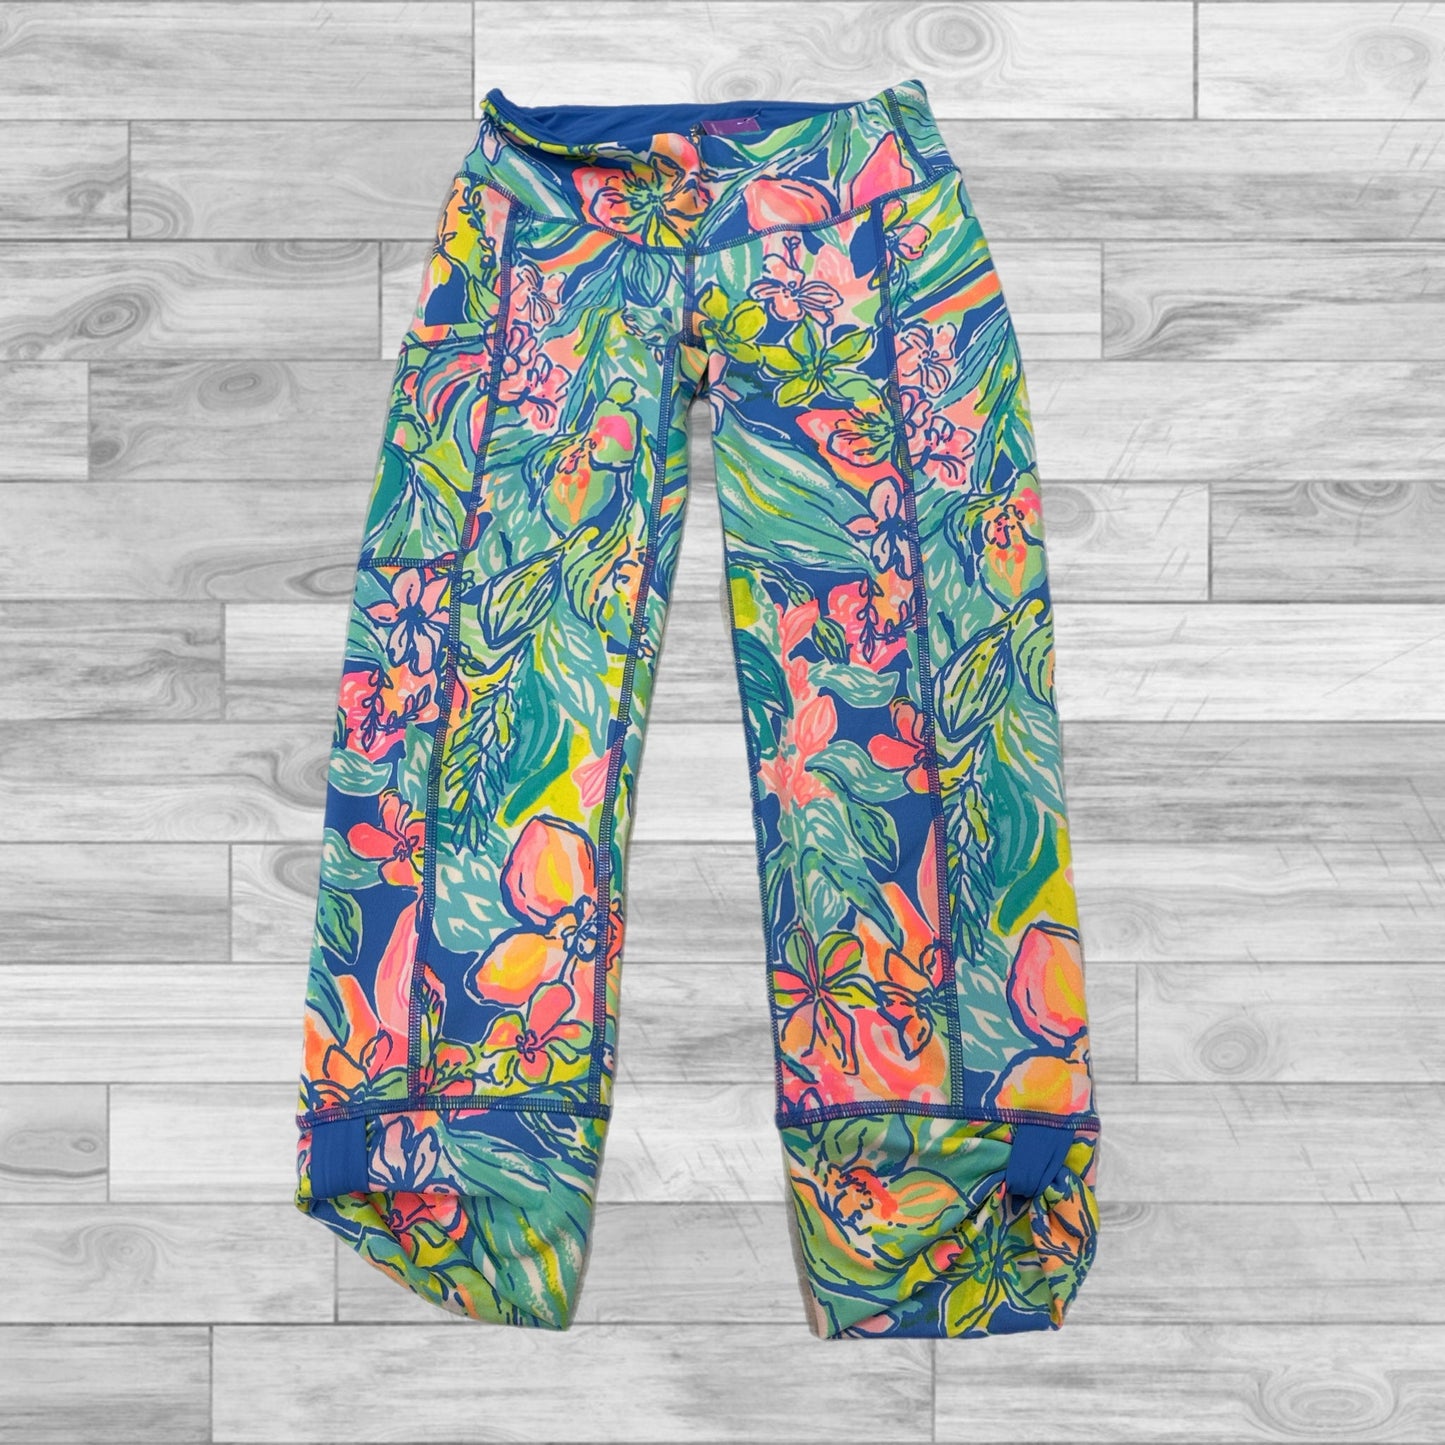 Multi-colored Athletic Capris Lilly Pulitzer, Size Xs